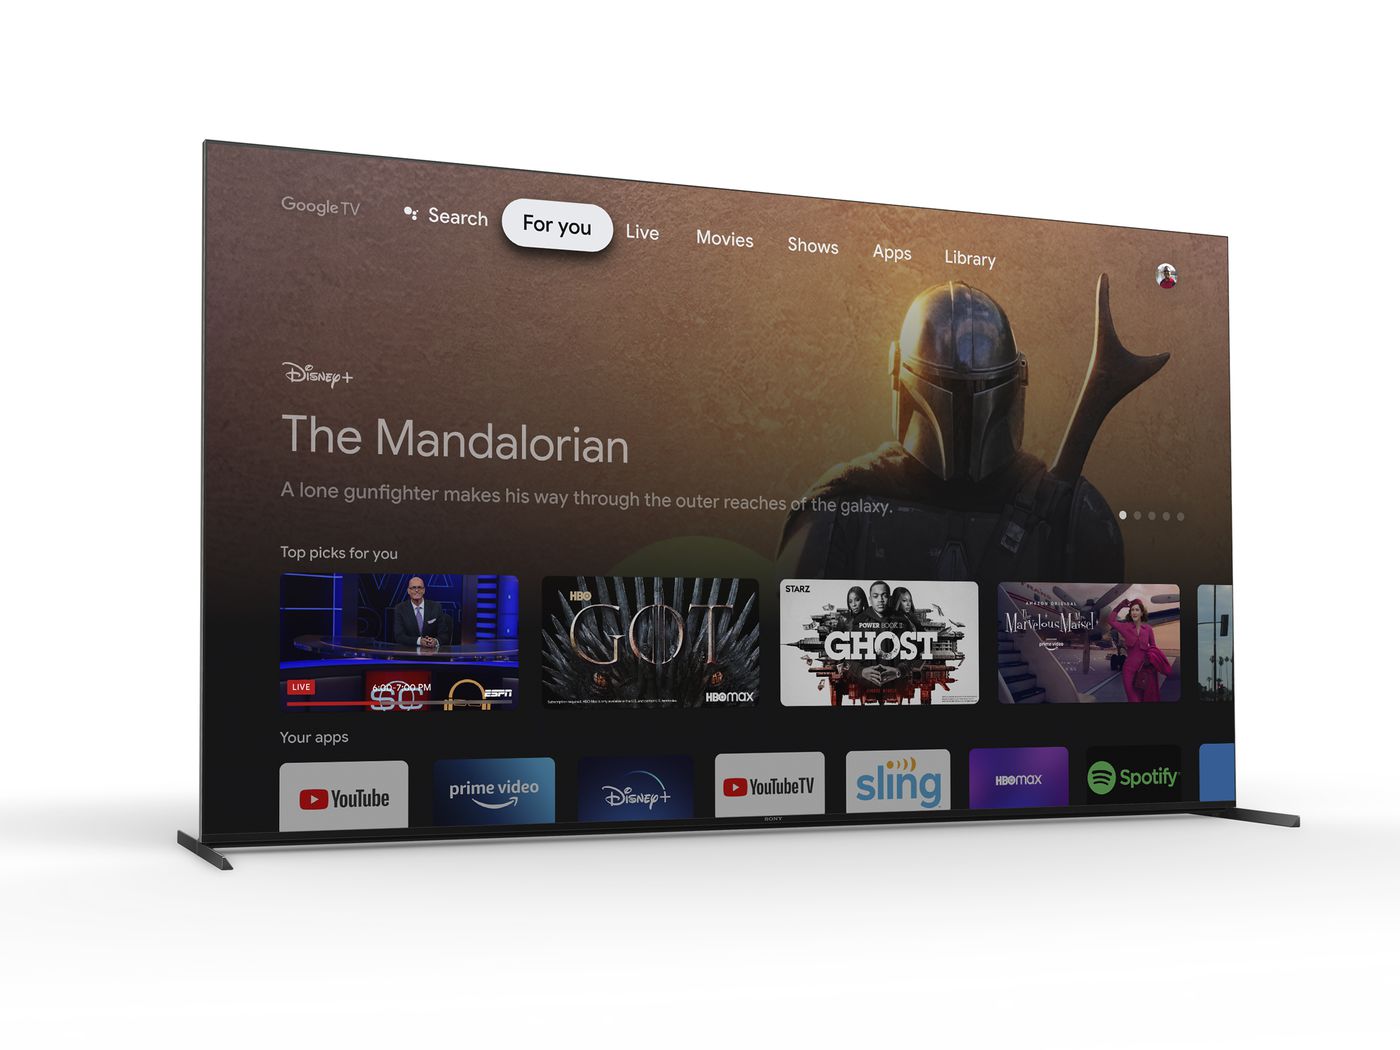 Sony S 2021 Tv Lineup Runs Google Tv And Fully Embraces Hdmi 2 1 The Verge